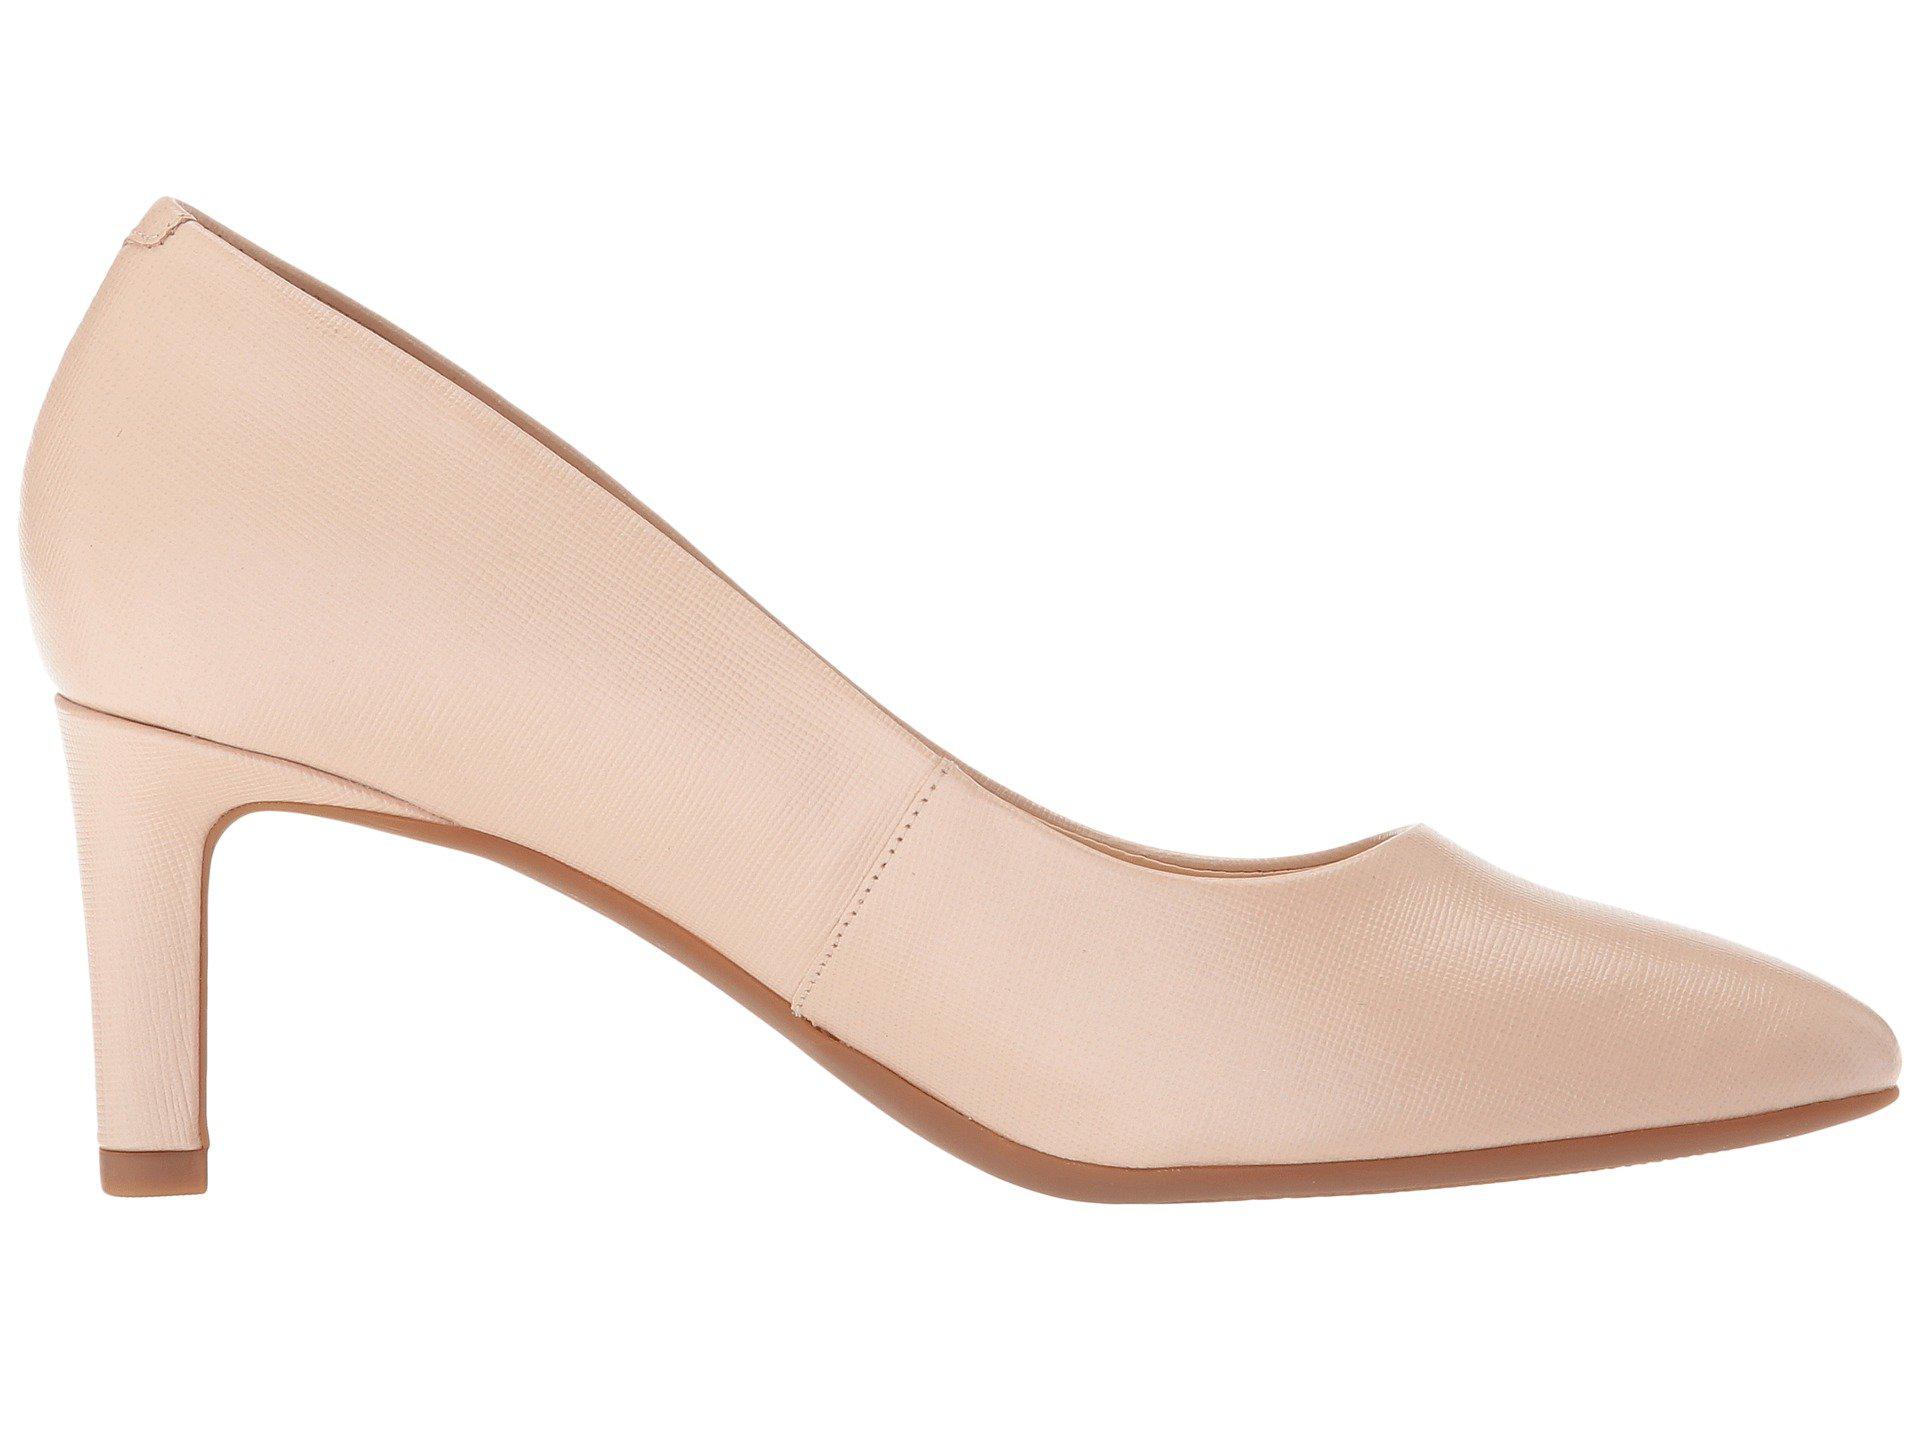 Clarks Calla Rose Pump in Cream Patent Leather (Natural) - Save 65% - Lyst